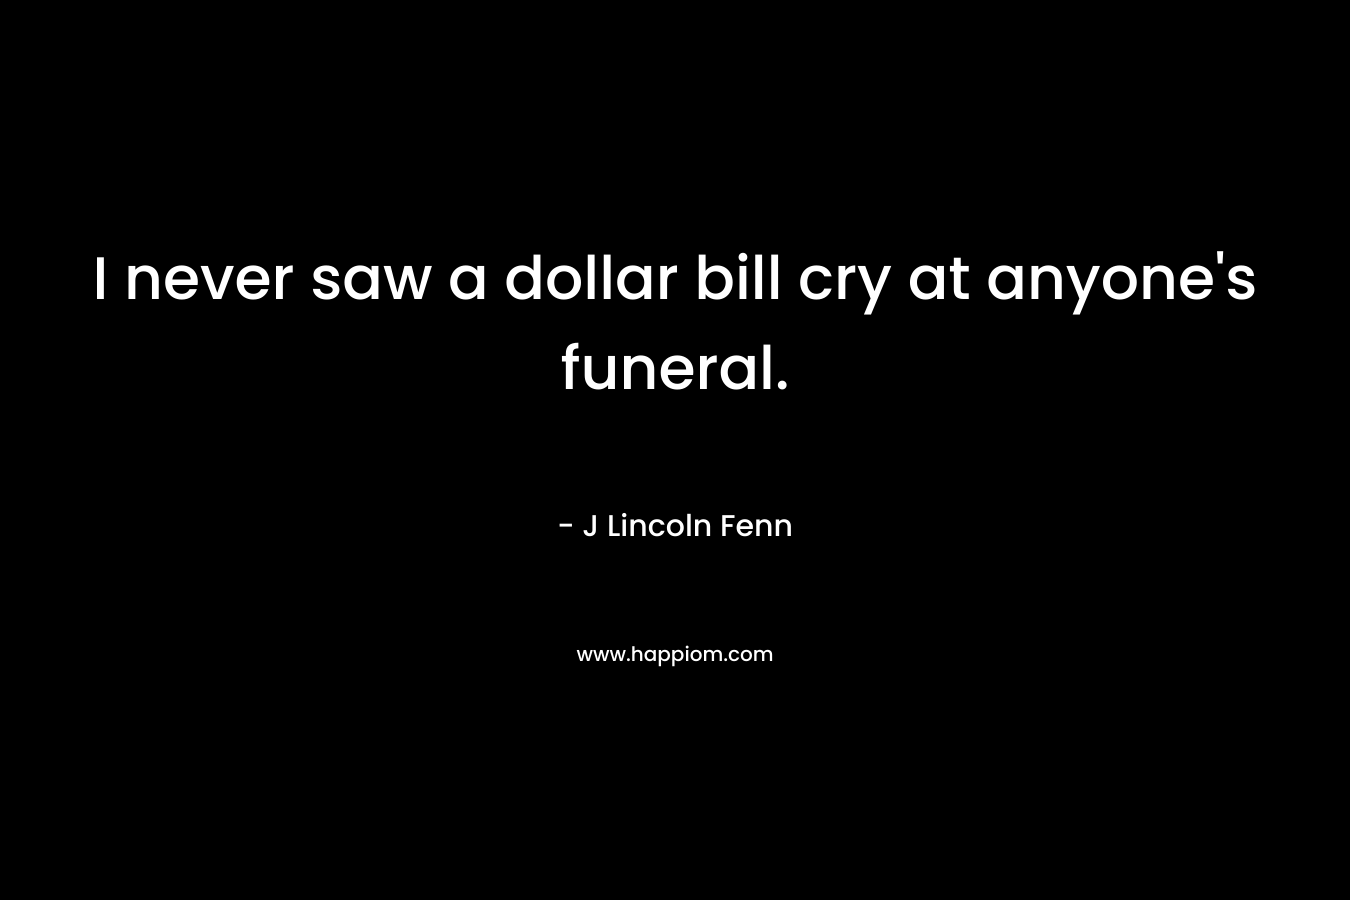 I never saw a dollar bill cry at anyone’s funeral. – J Lincoln Fenn